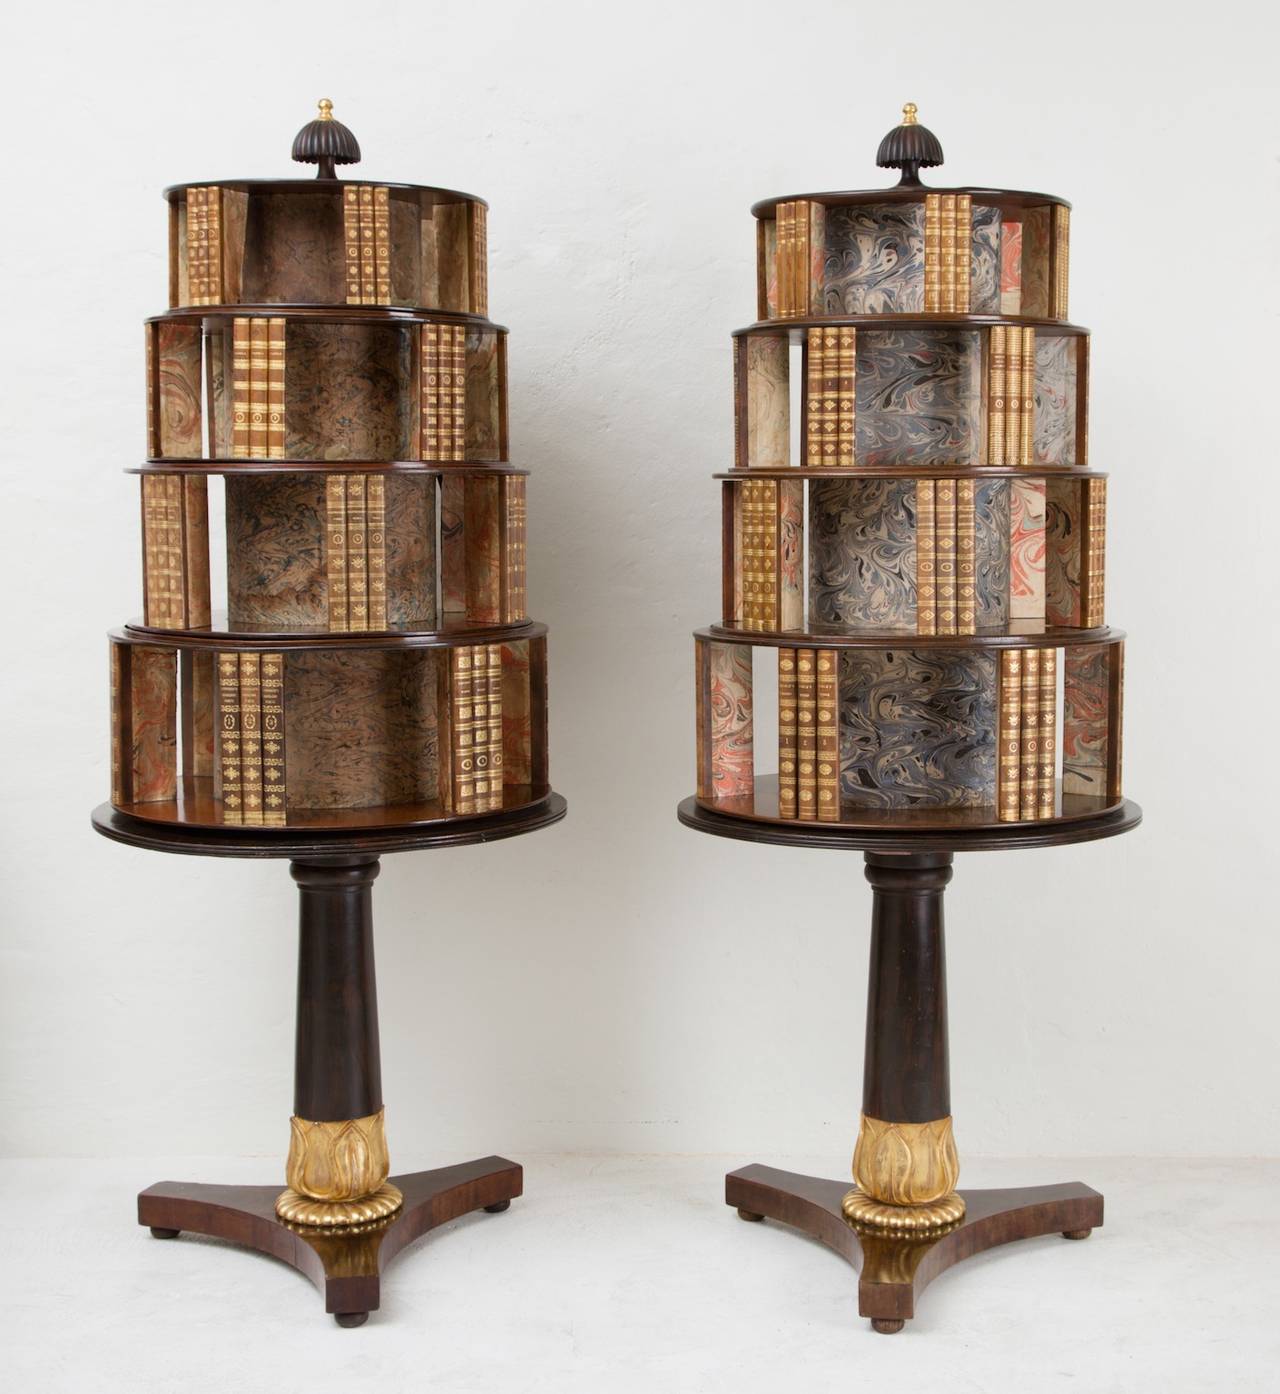 Early 19th Century Regency Faux Rosewood and Gilt Book Stands For Sale